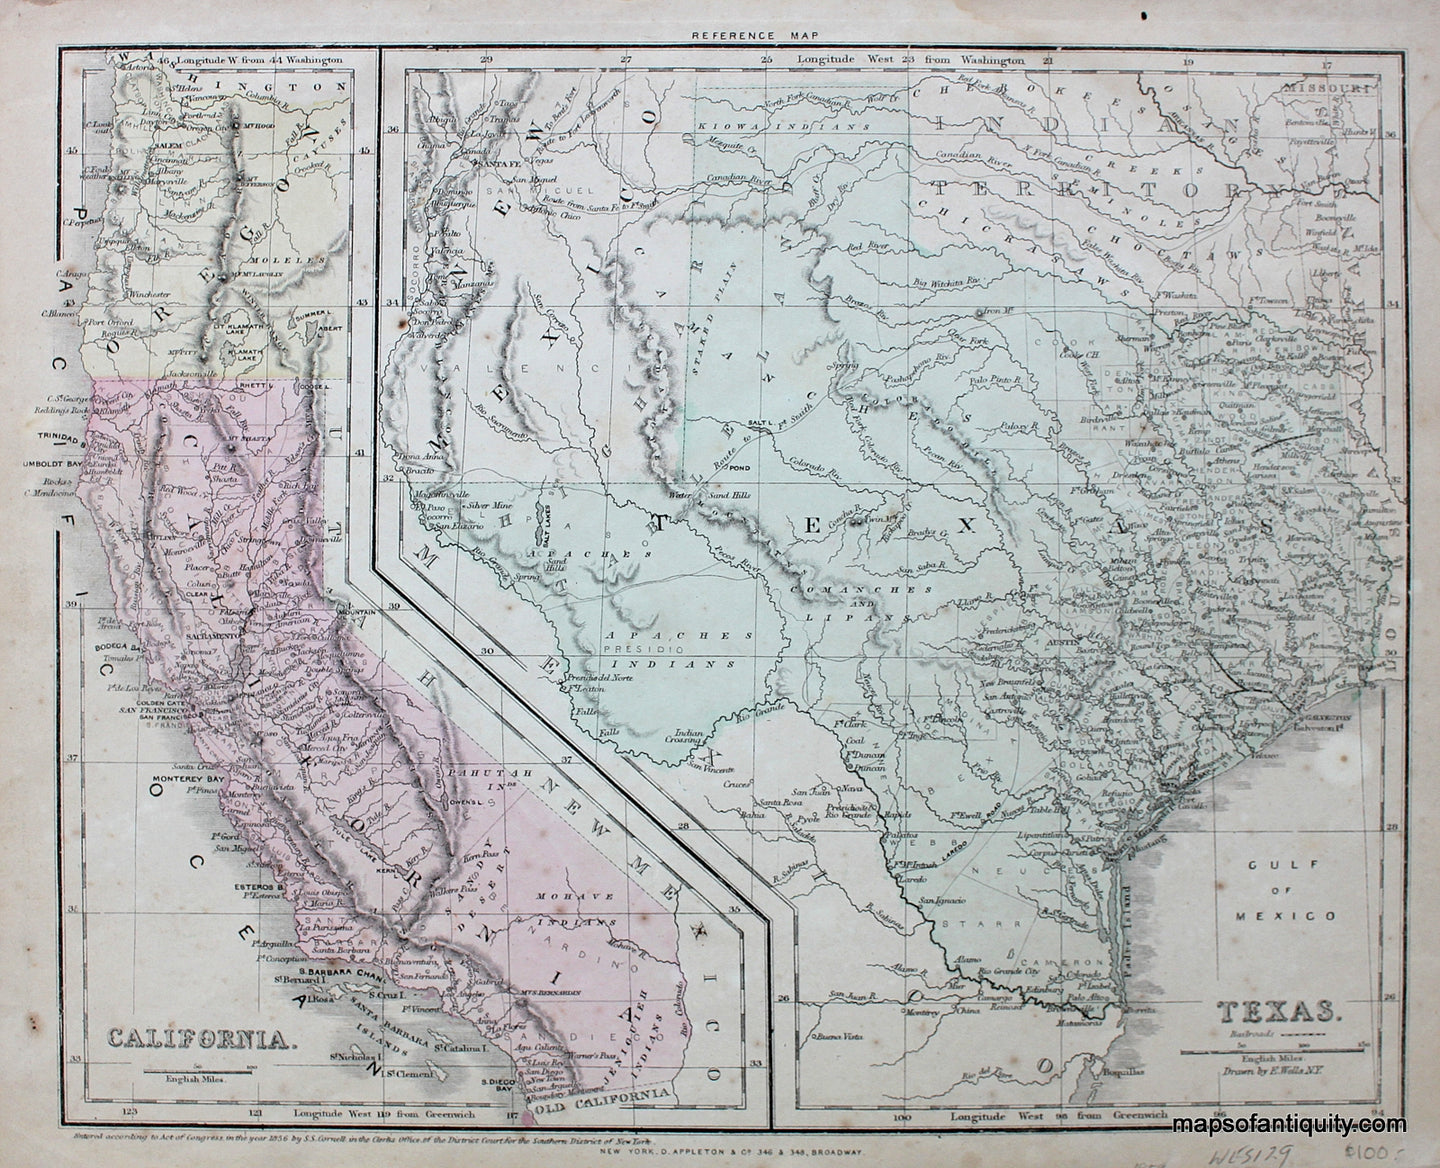 Antique-Hand-Colored-Map-California.-Texas.**********-California-Texas-1856-Cornell-Maps-Of-Antiquity